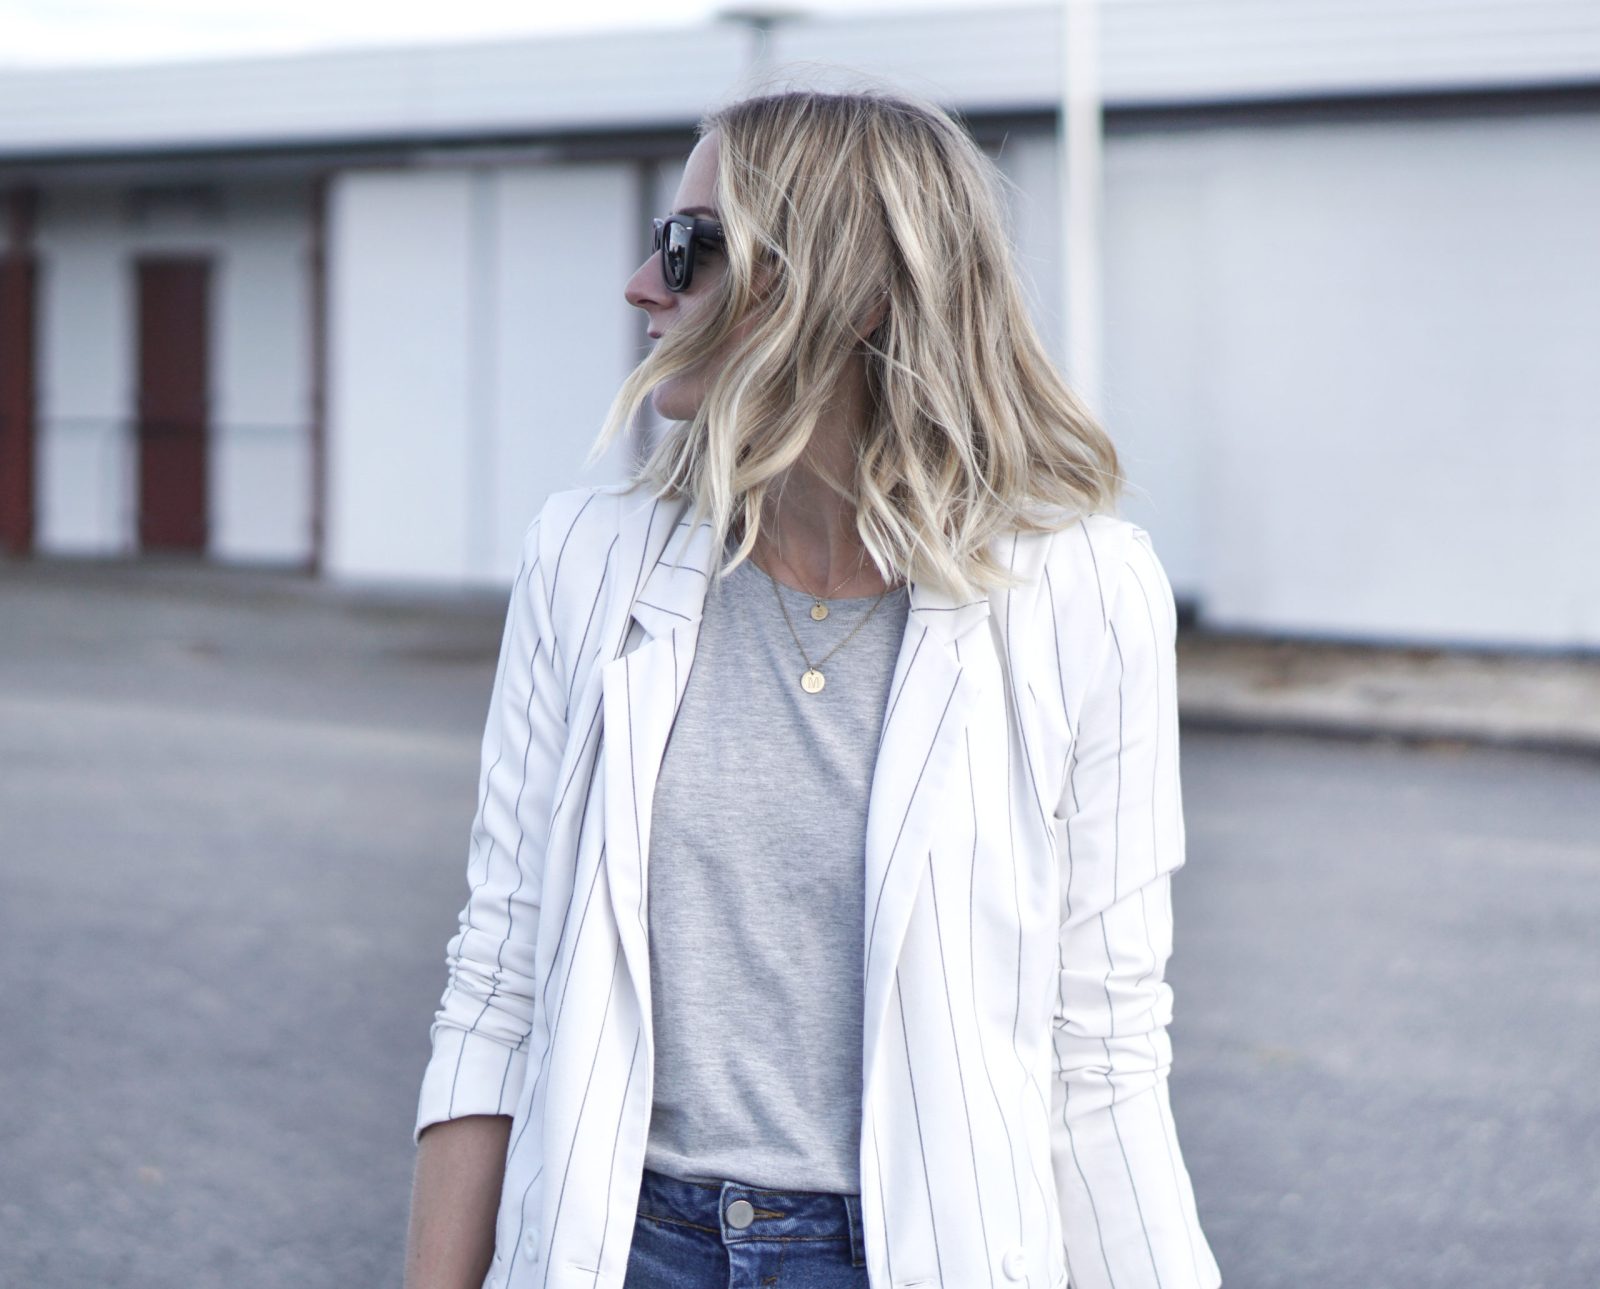 Style: white blazer & ripped jeans.